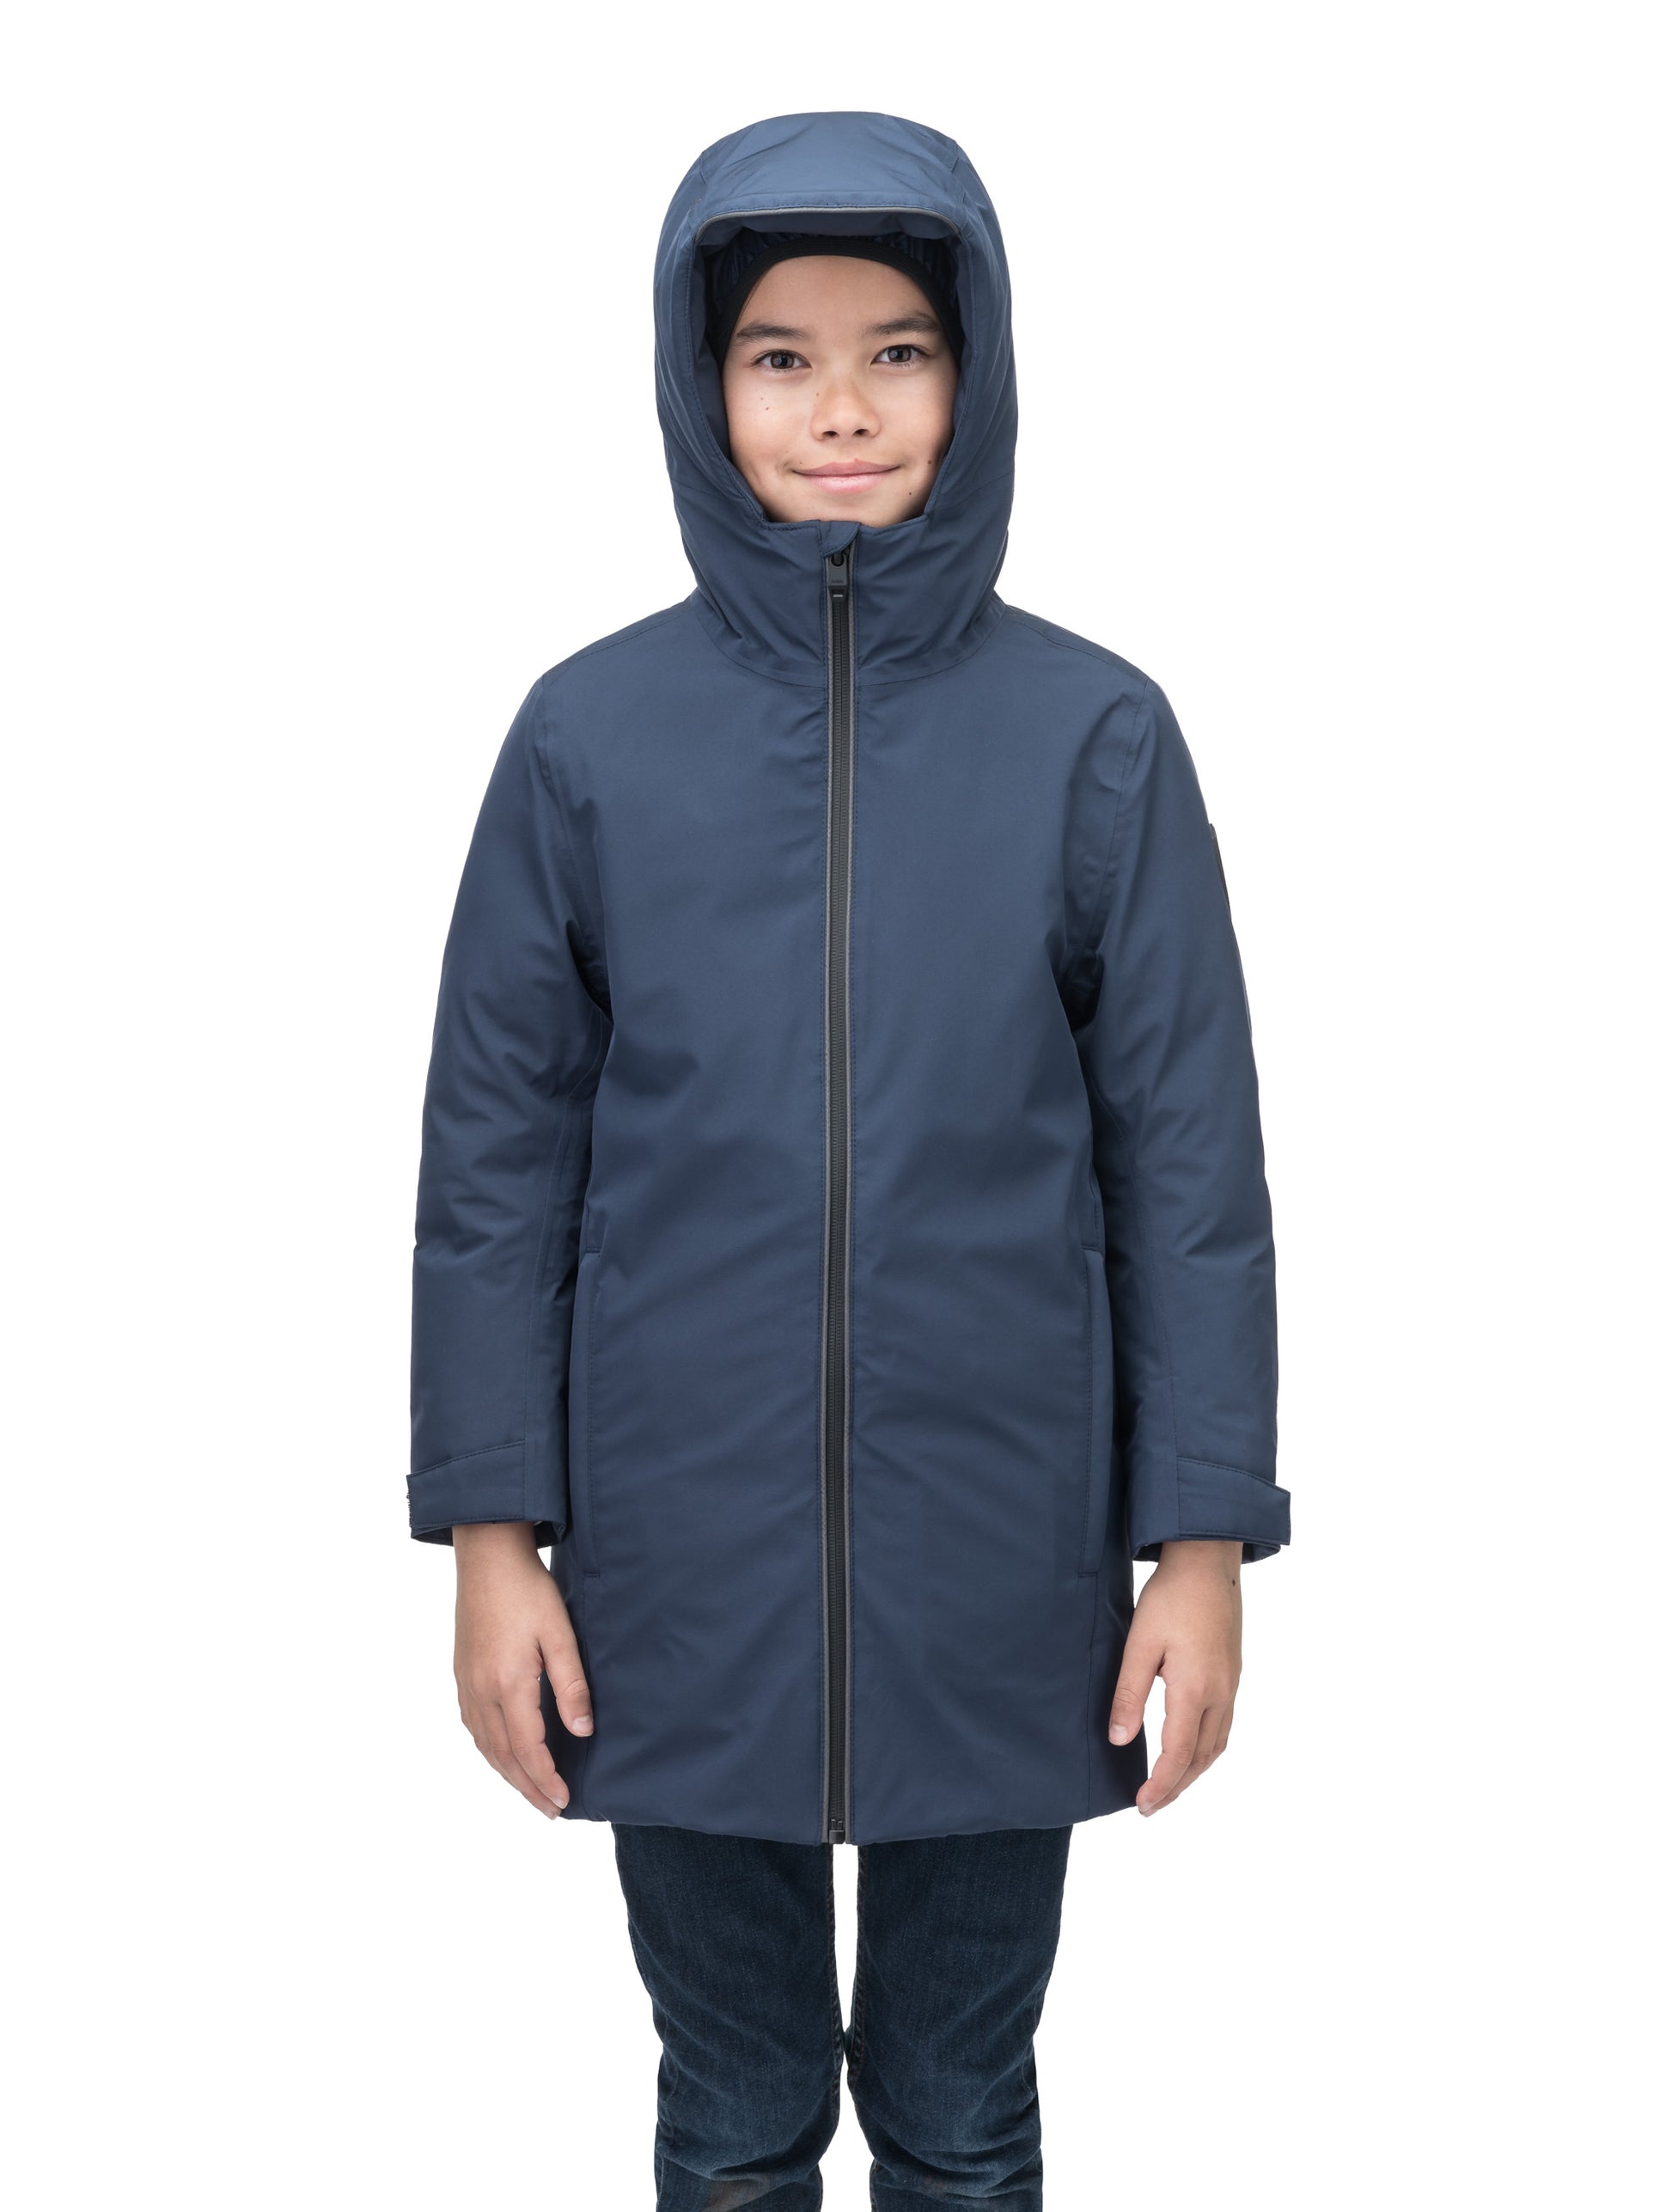 Little Comet Kids Parka in thigh length, Canadian duck down insulation, non-removable hood, two-way front zipper, packable body, in Marine